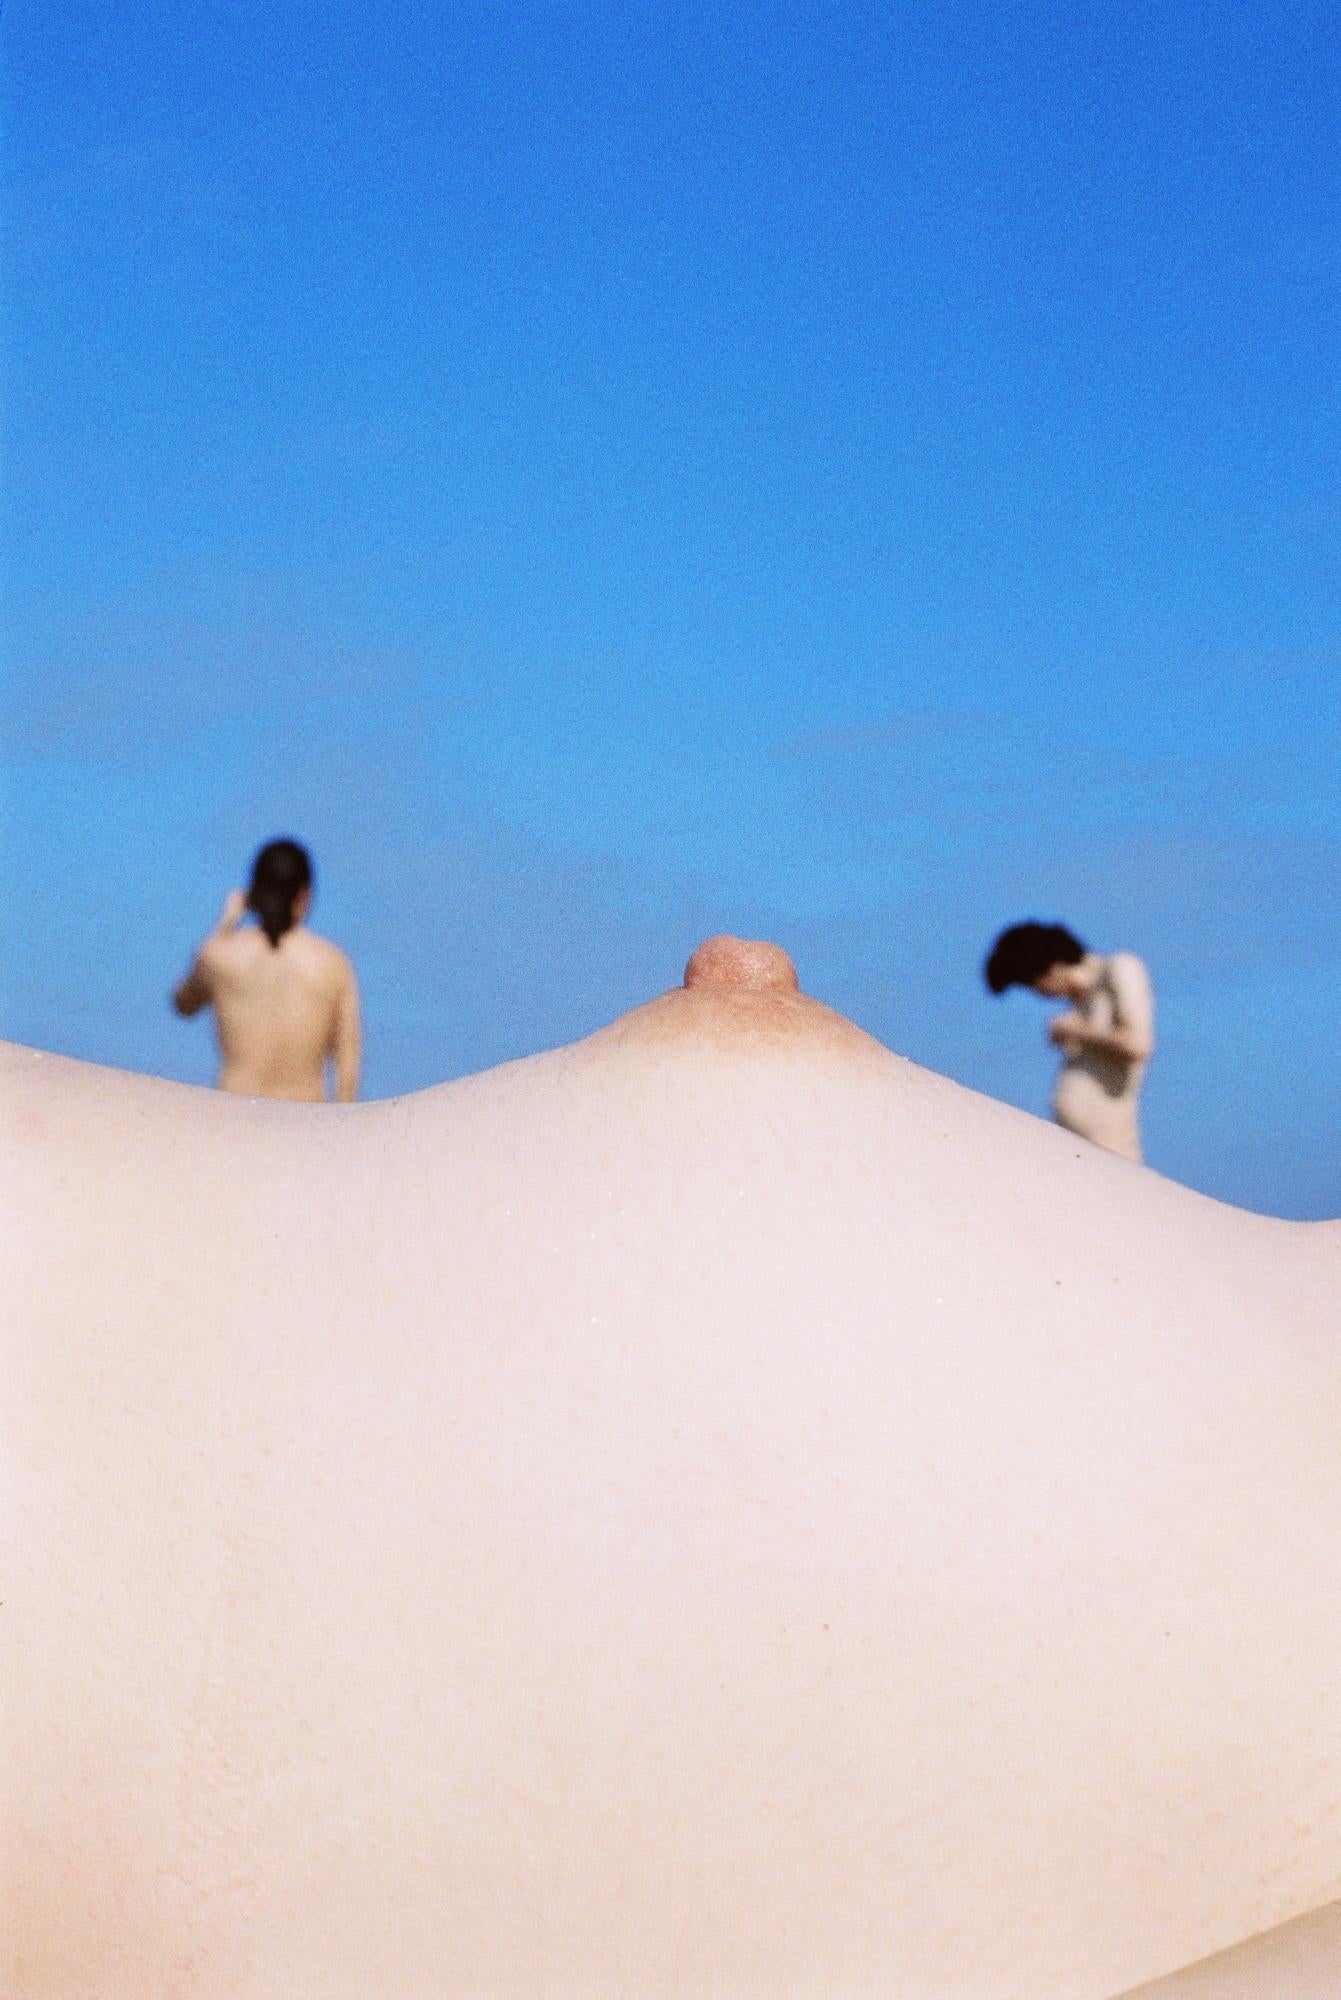 JOHN Yuyi (*1991, Taiwan)
People on the beach 6, 2019
Archival Pigment Print
Sheet 120 x 90 cm (48 x 36 in.)
Edition of 3, plus 1 AP; Ed. no. 1/3

John Yuyi (*1991, Taiwan) is known worldwide as an interdisciplinary voice of her generation in art,